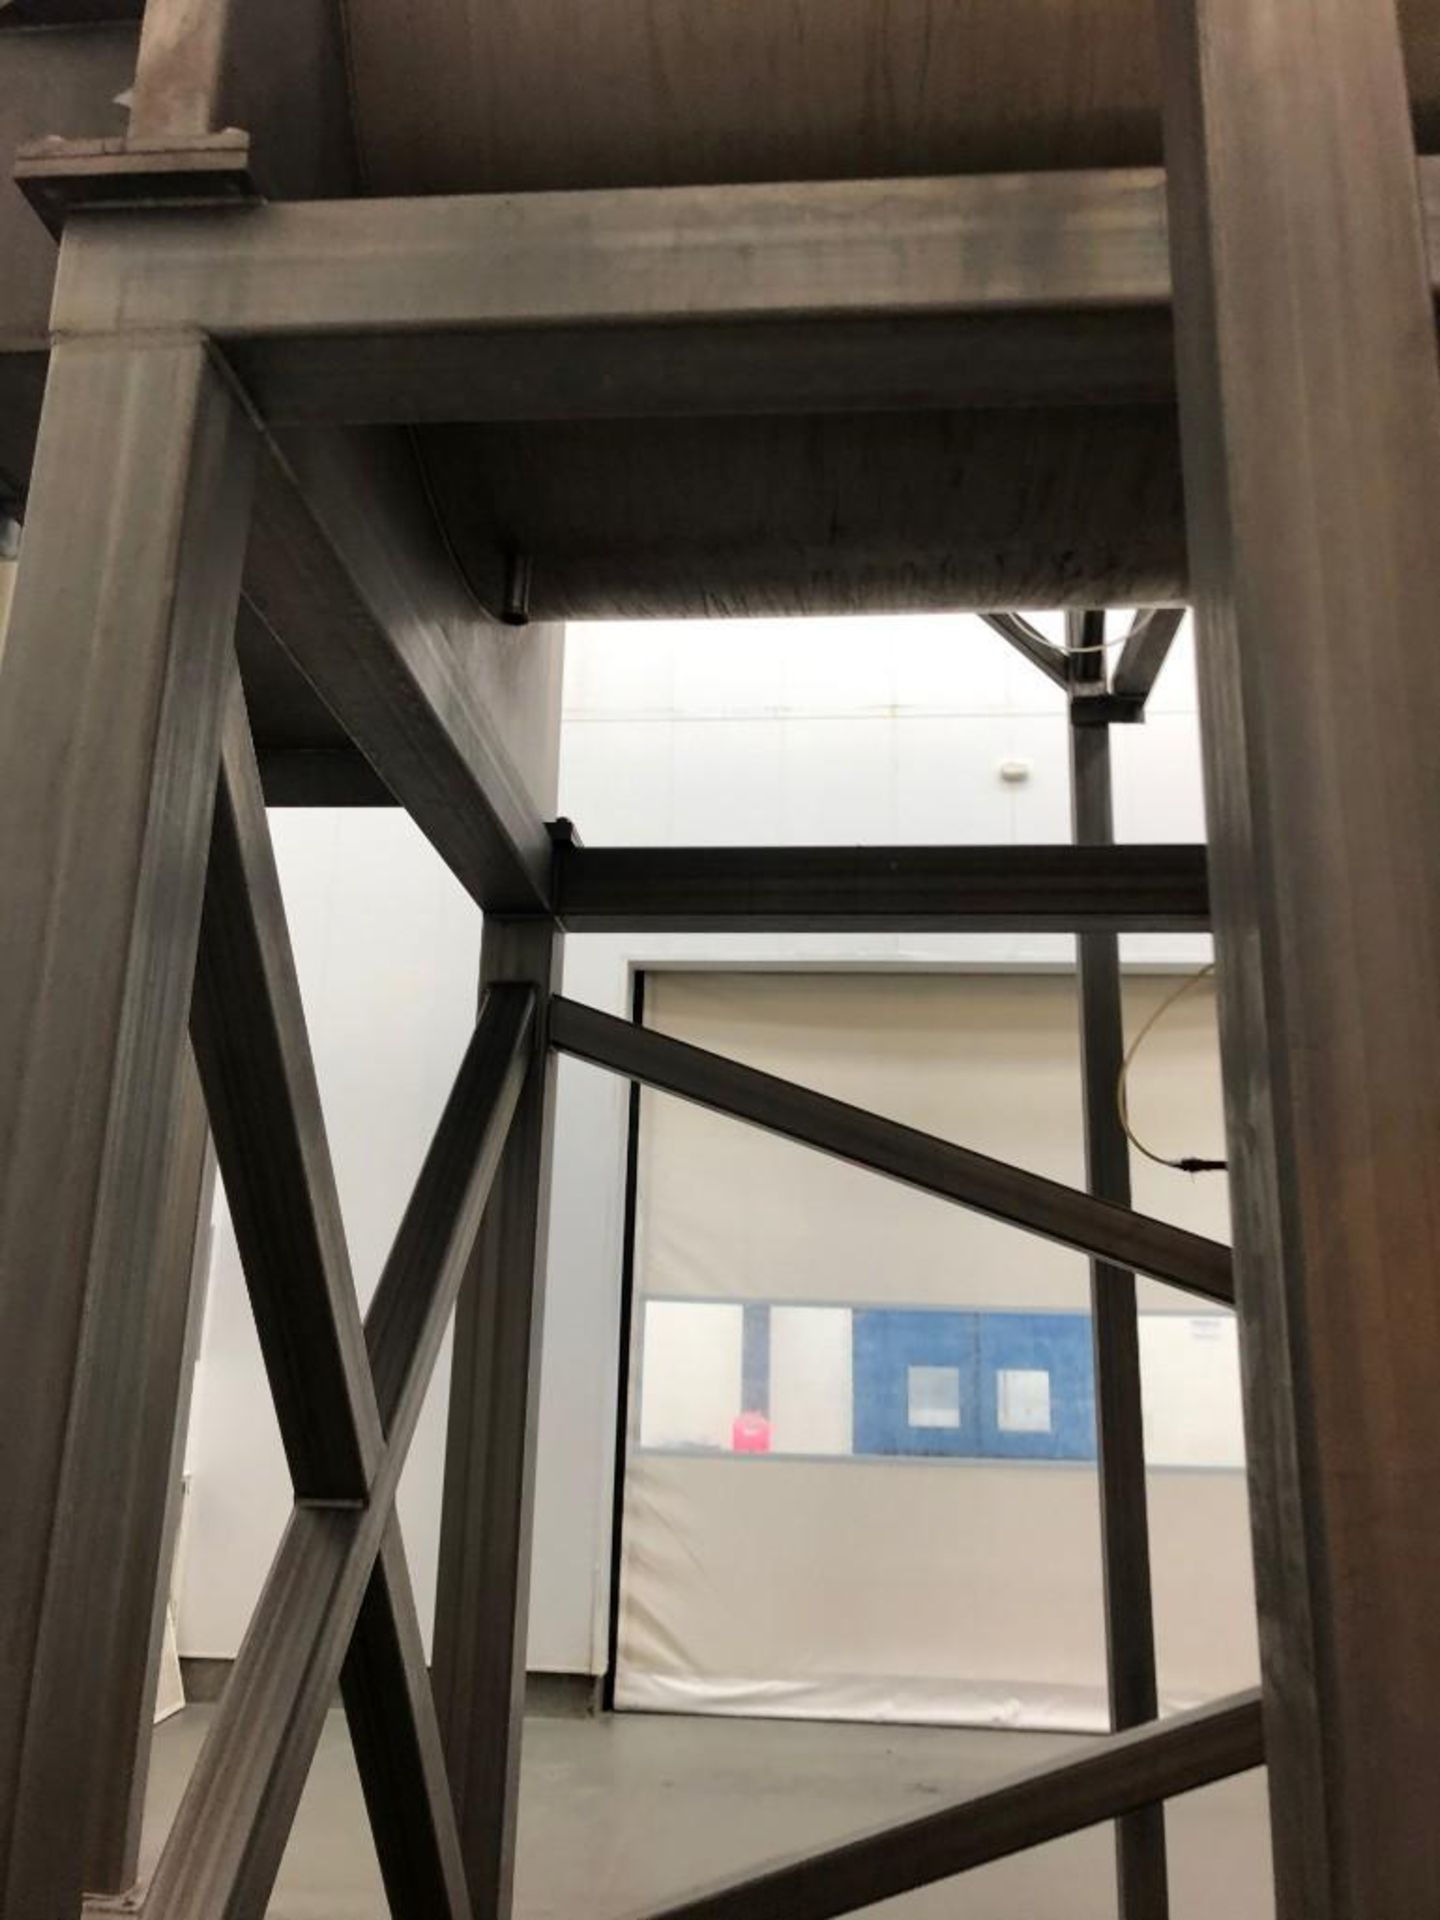 436 Cubic Foot Marion Double Ribbon Blender on Mezzanine - Image 12 of 41